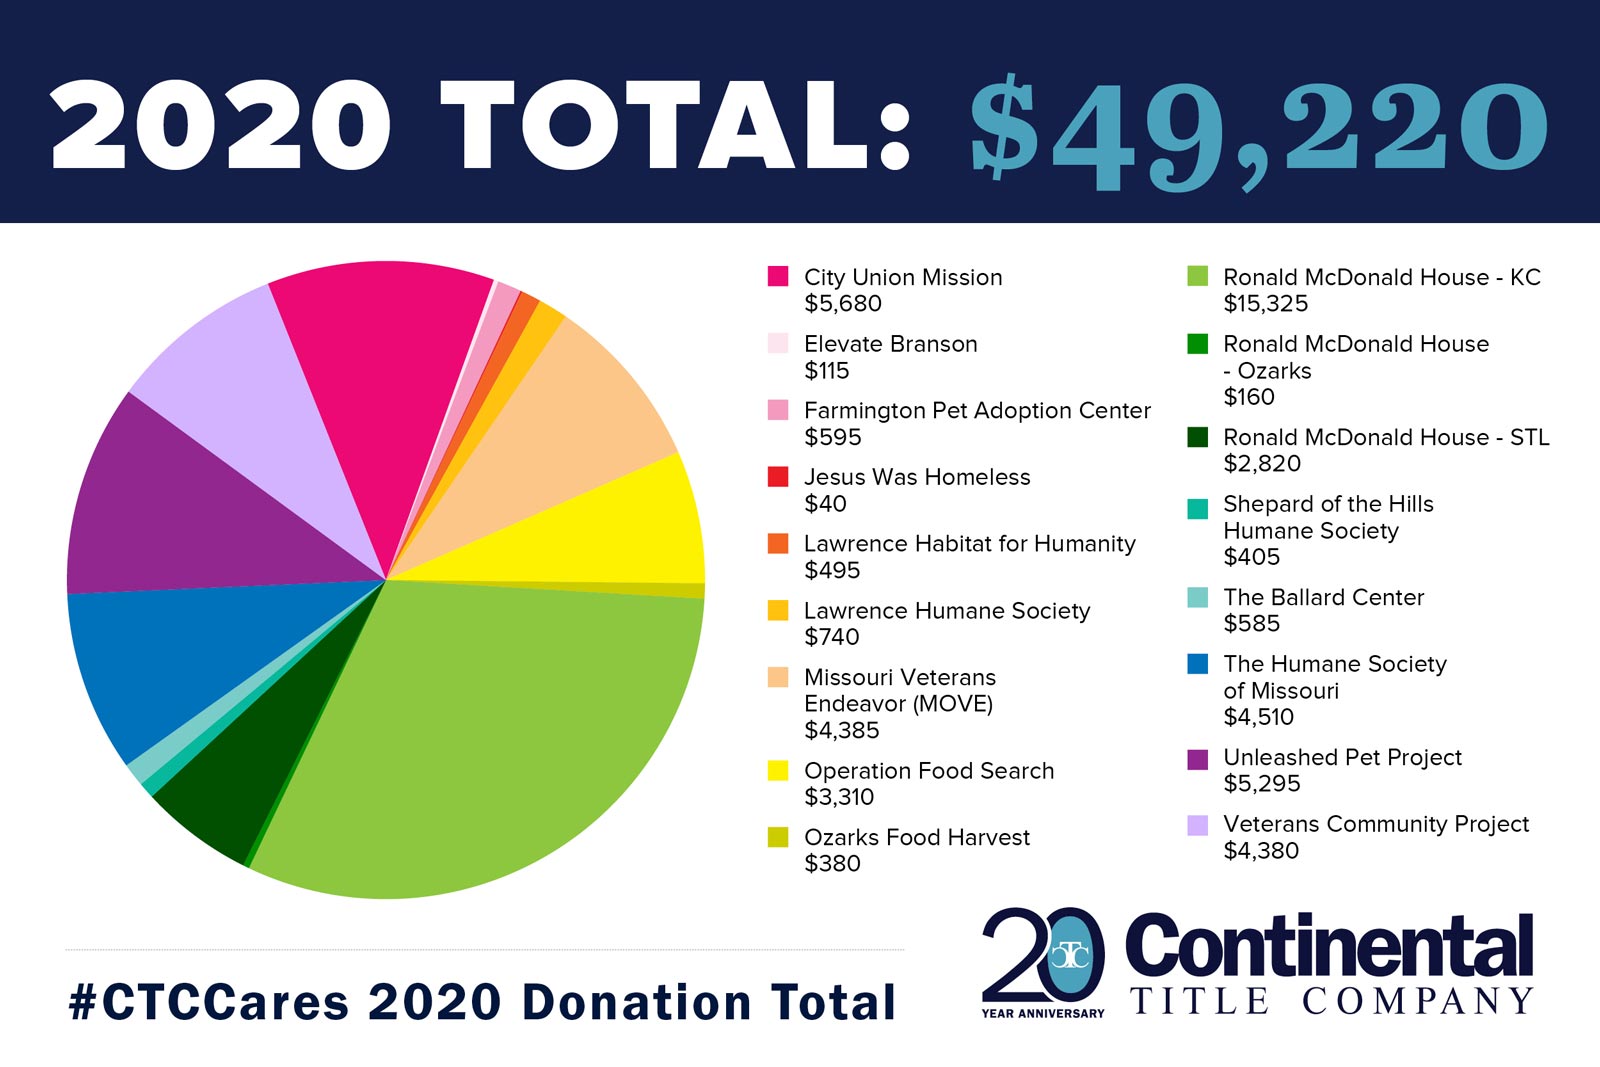 CTC Cares pie chart showing 2020 total donations of $49,220